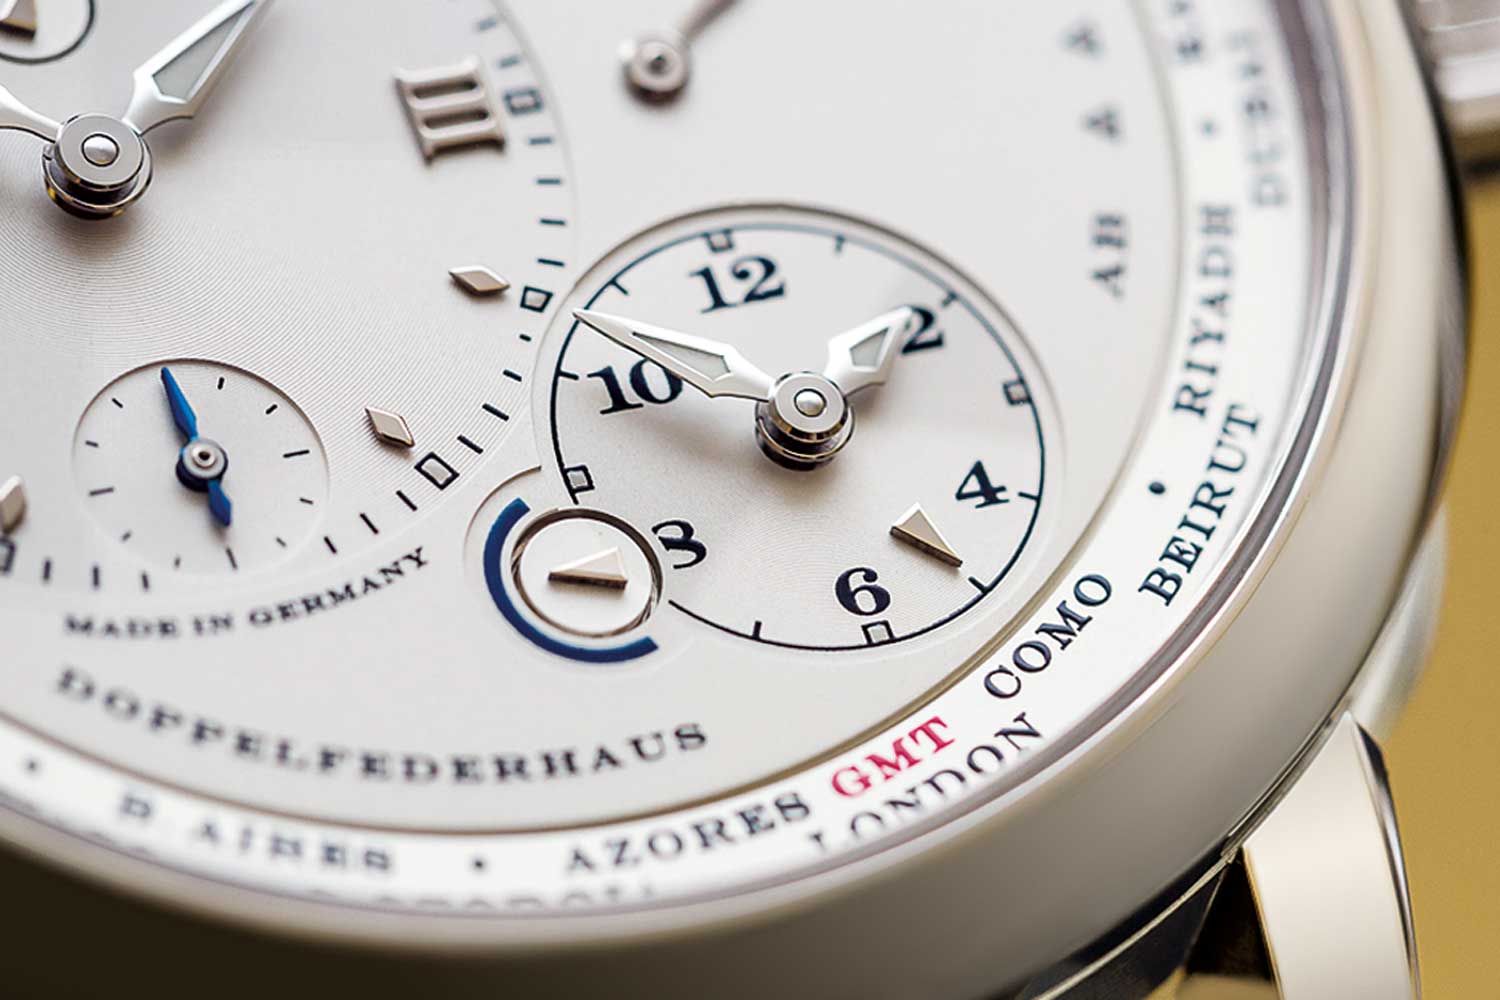 Lange 1 Time Zone “Como Edition” with a city ring that simplifies the setting of a second time zone